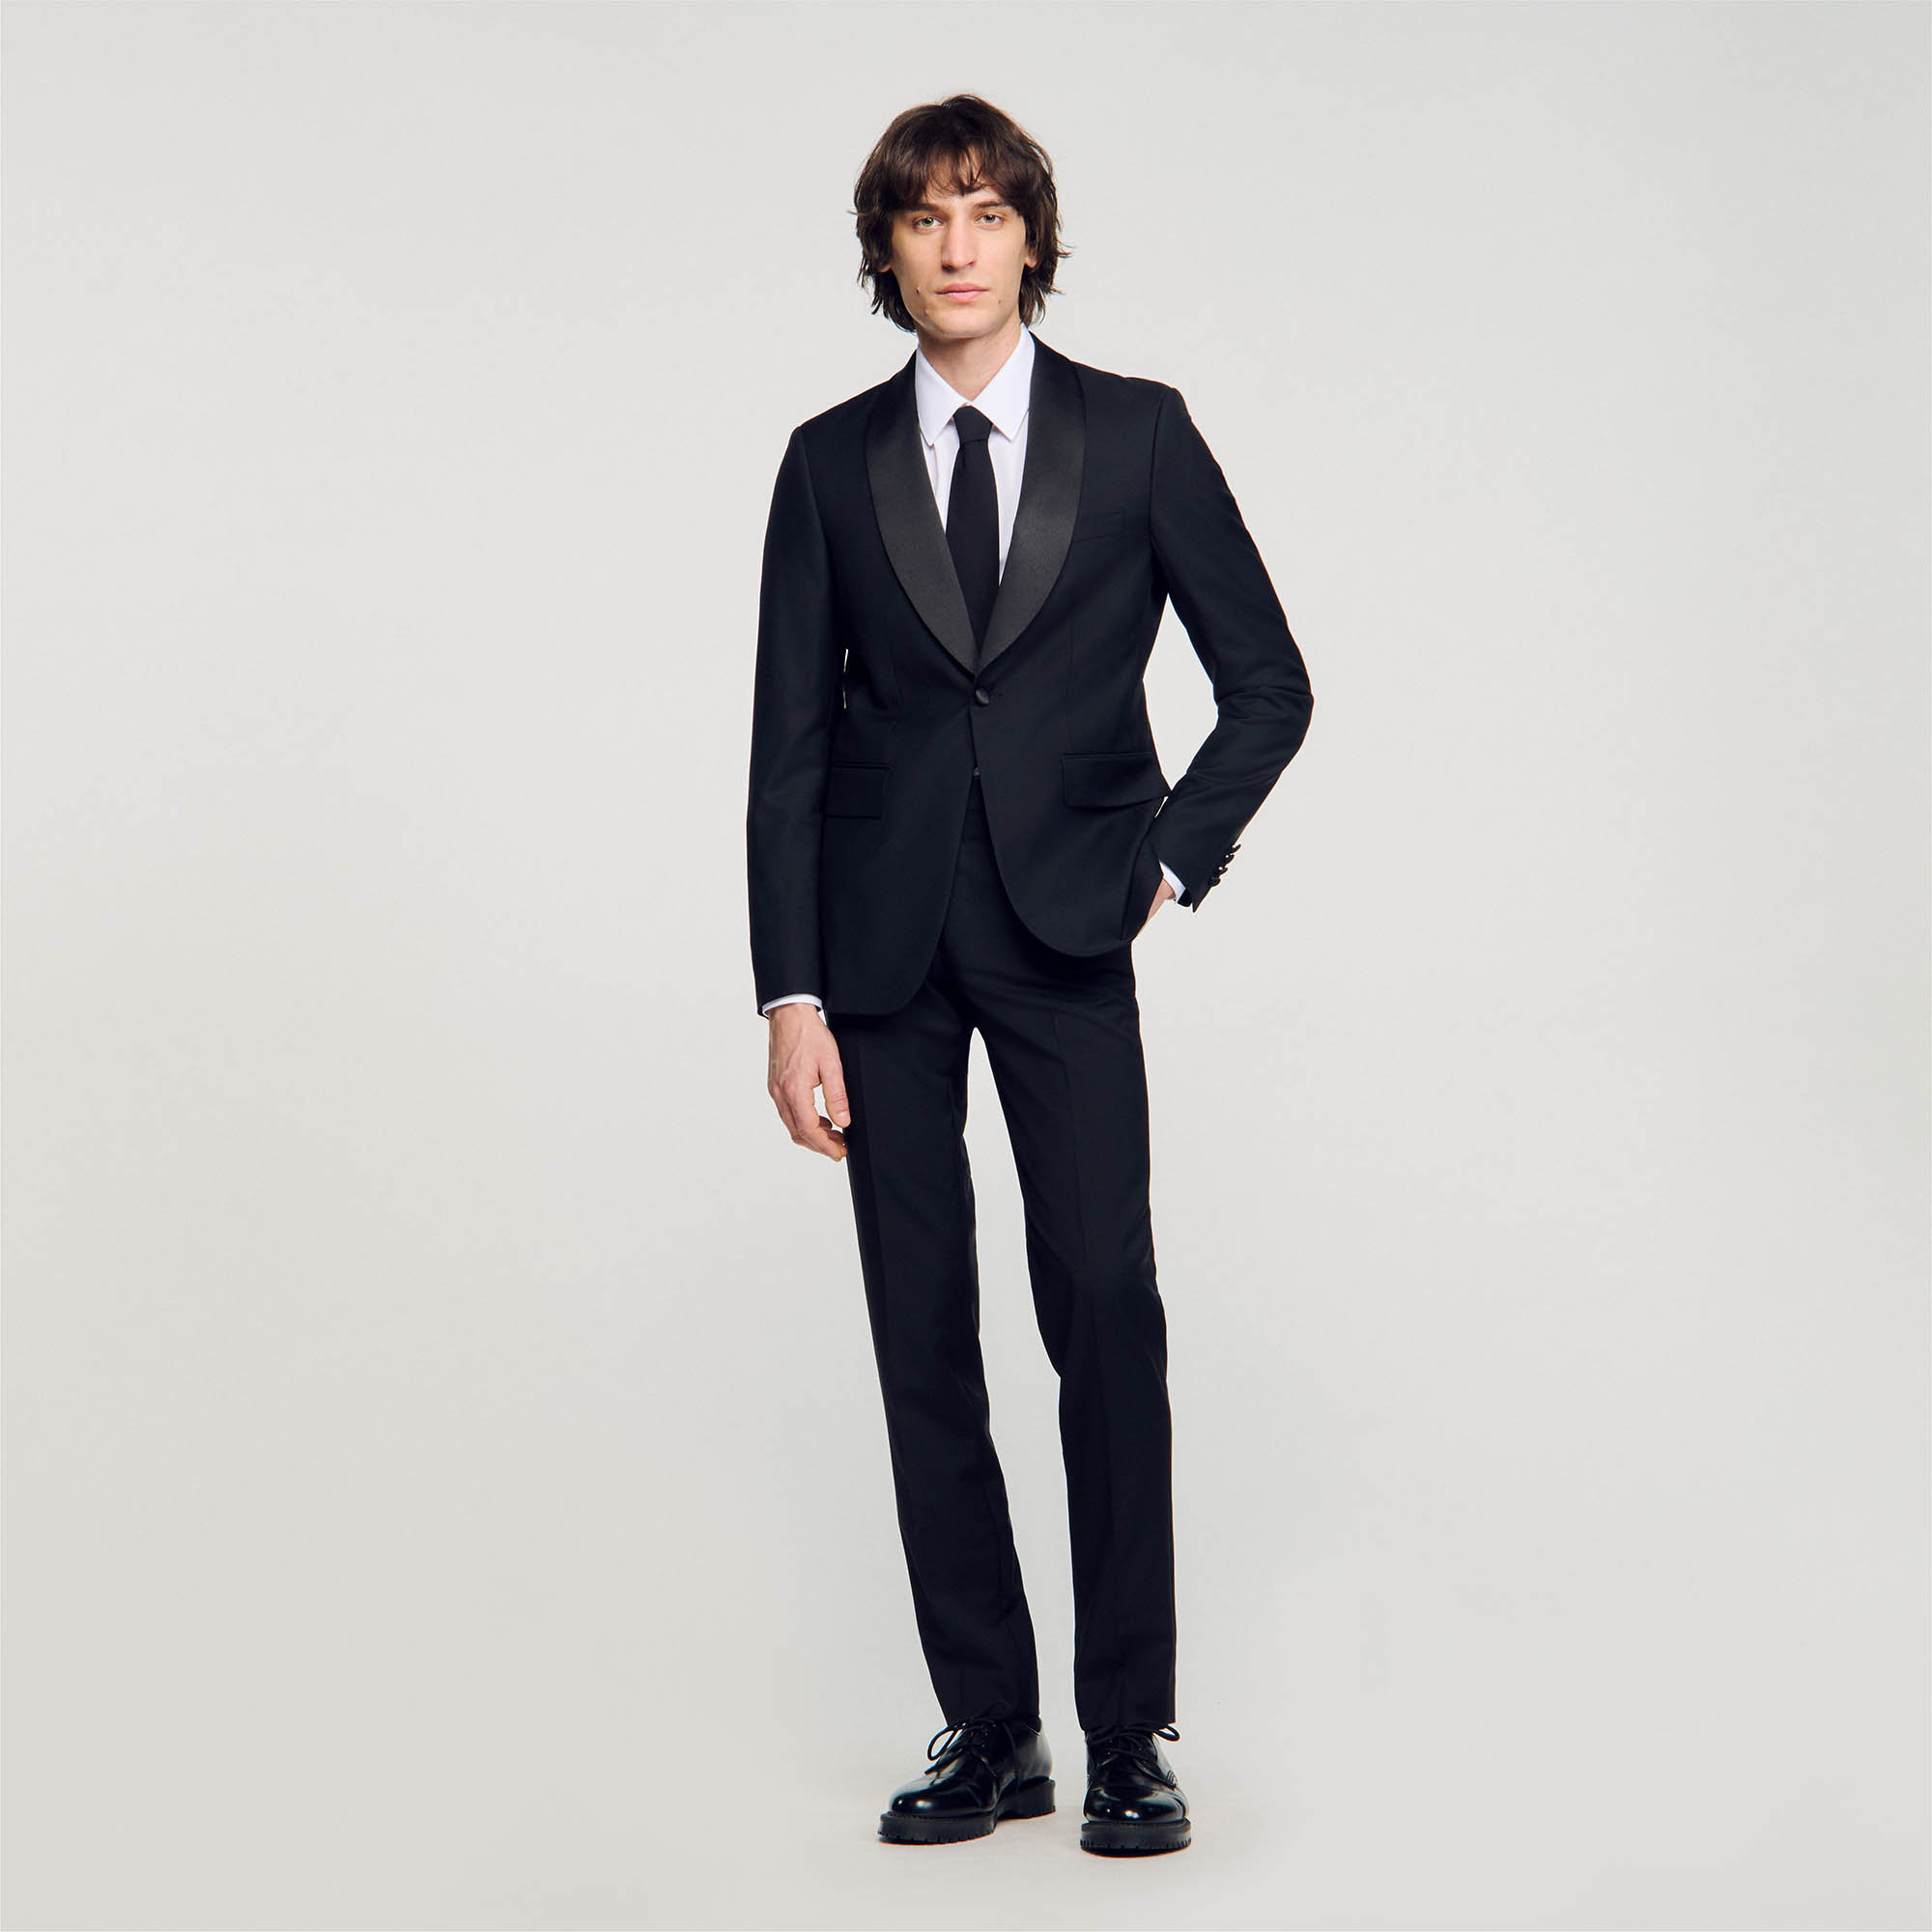 Sandro wool Tuxedo jacket with satin shawl collar, long sleeves, button fastening and flap pockets